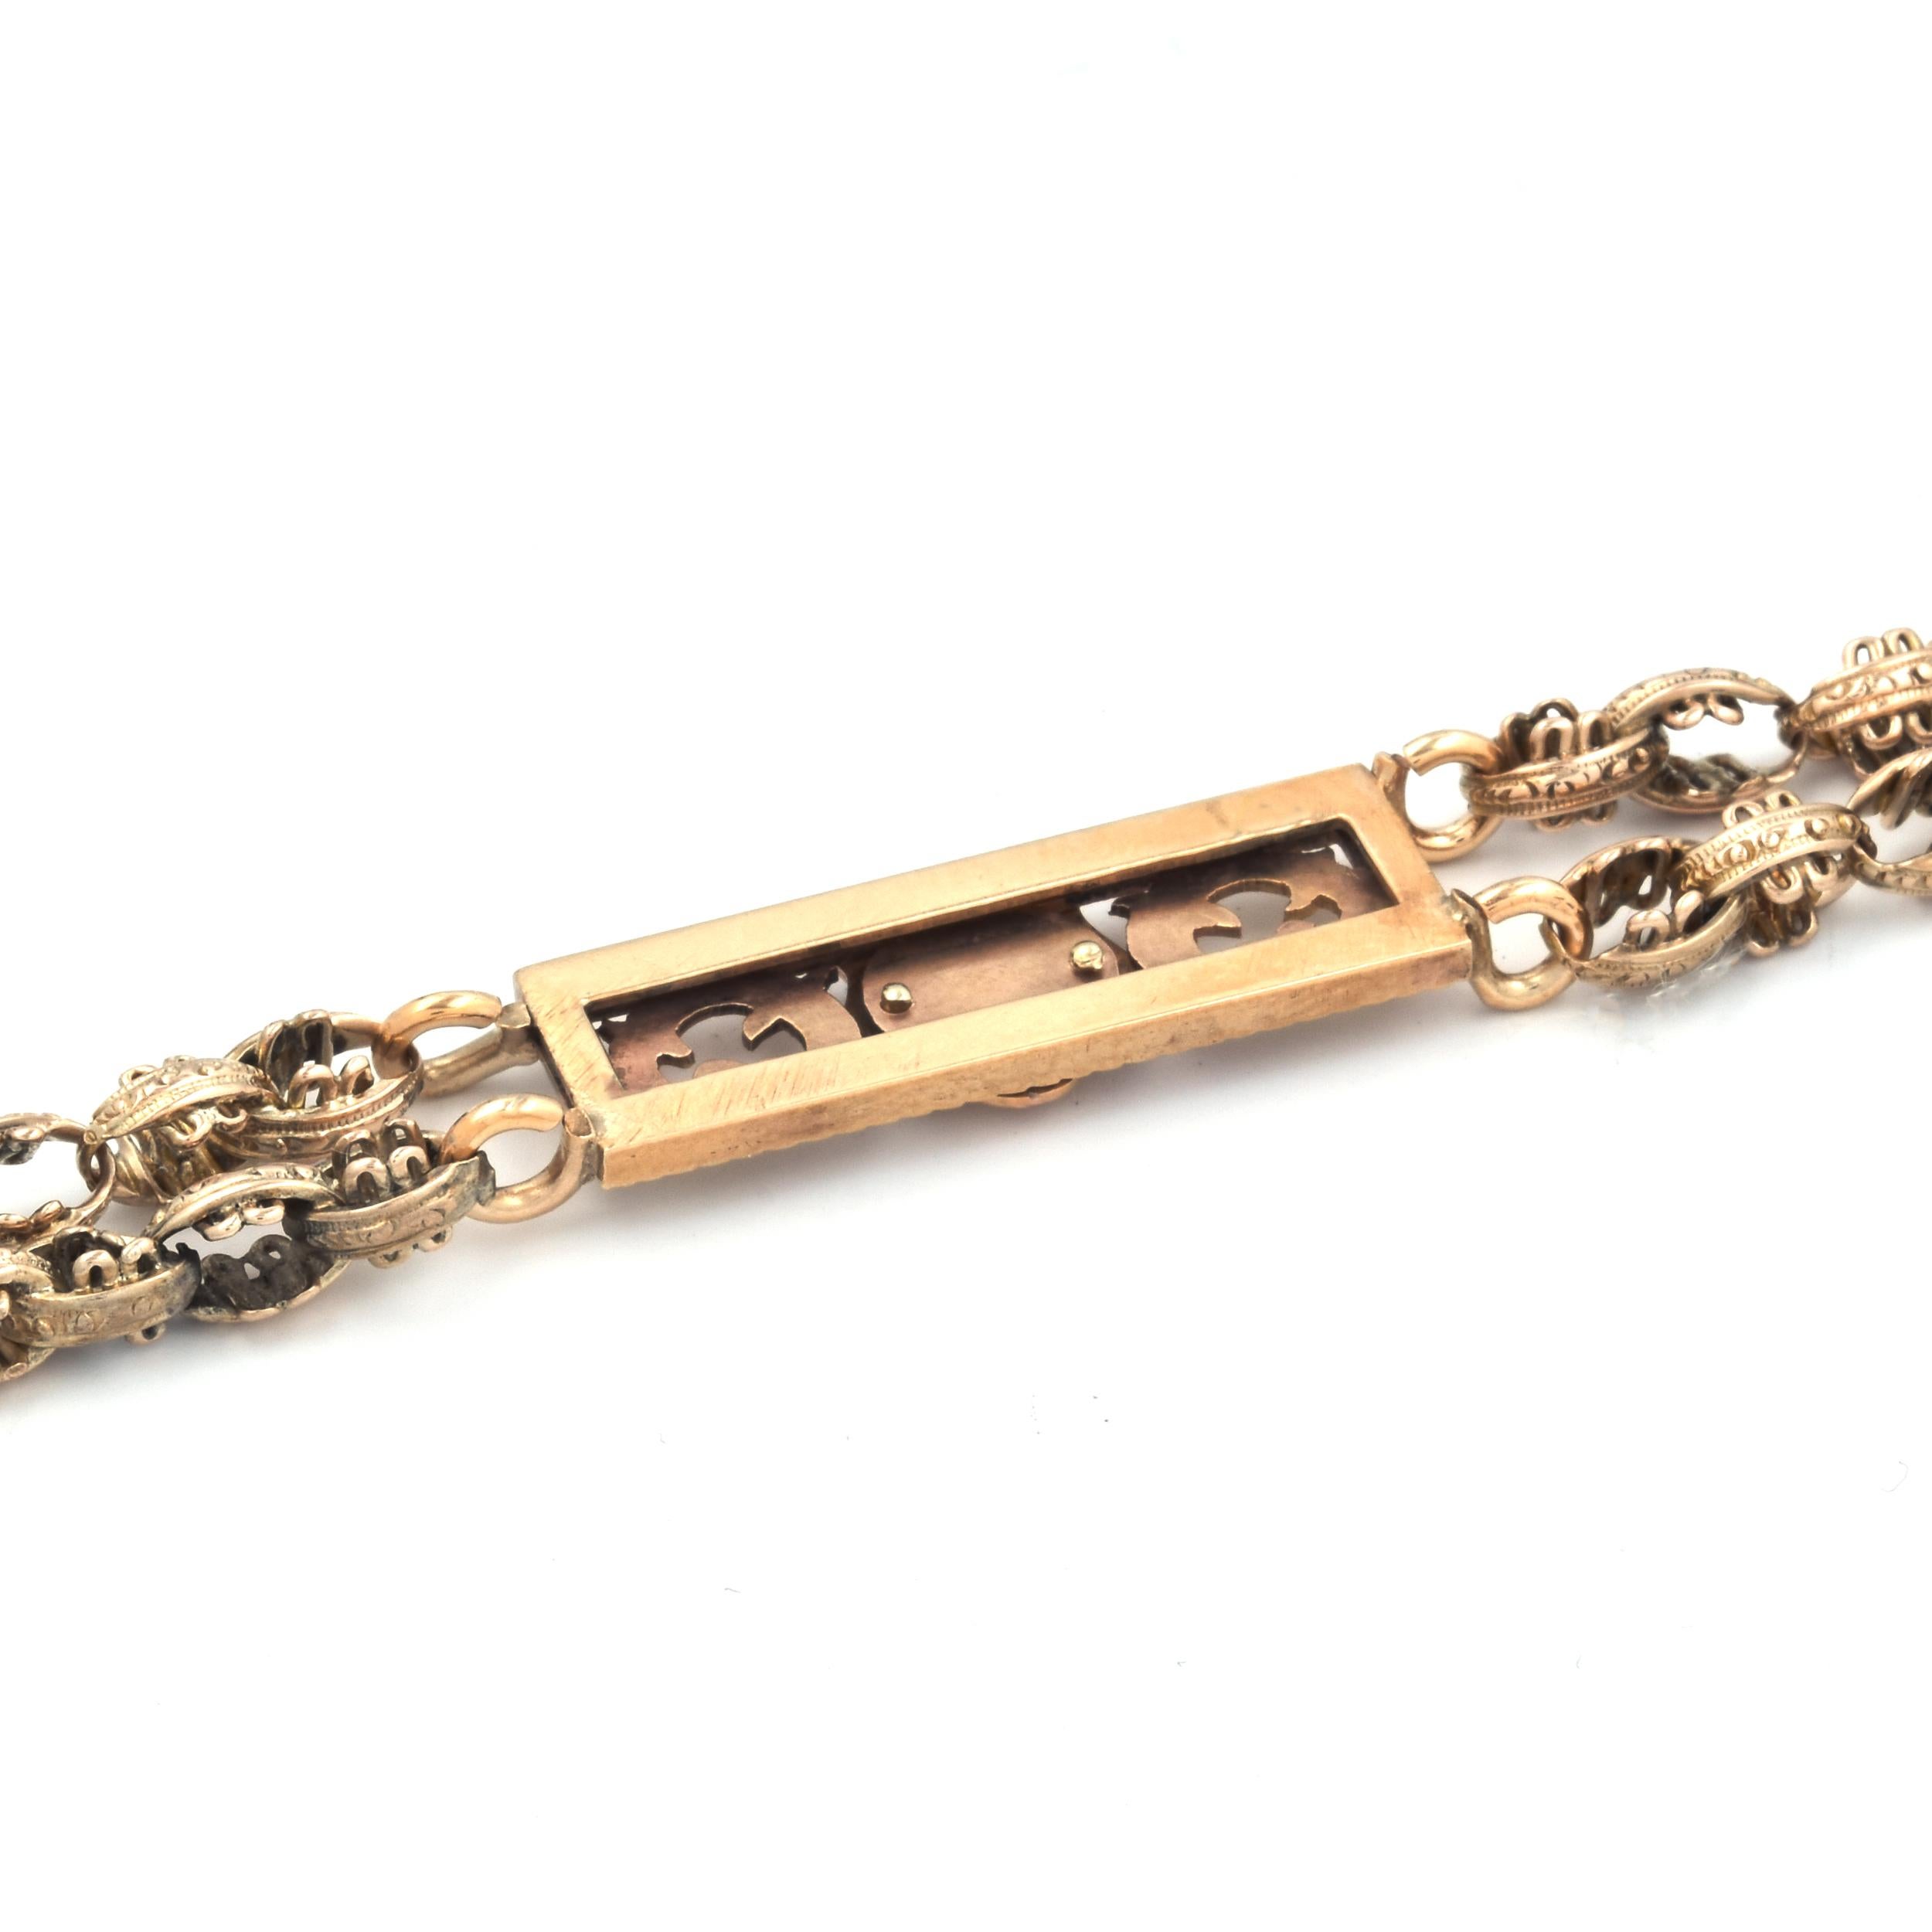 Designer: custom
Material: 14K yellow gold 
Dimensions: bracelet will fit up to a 6.5-inch wrist
Weight: 17.35 grams

